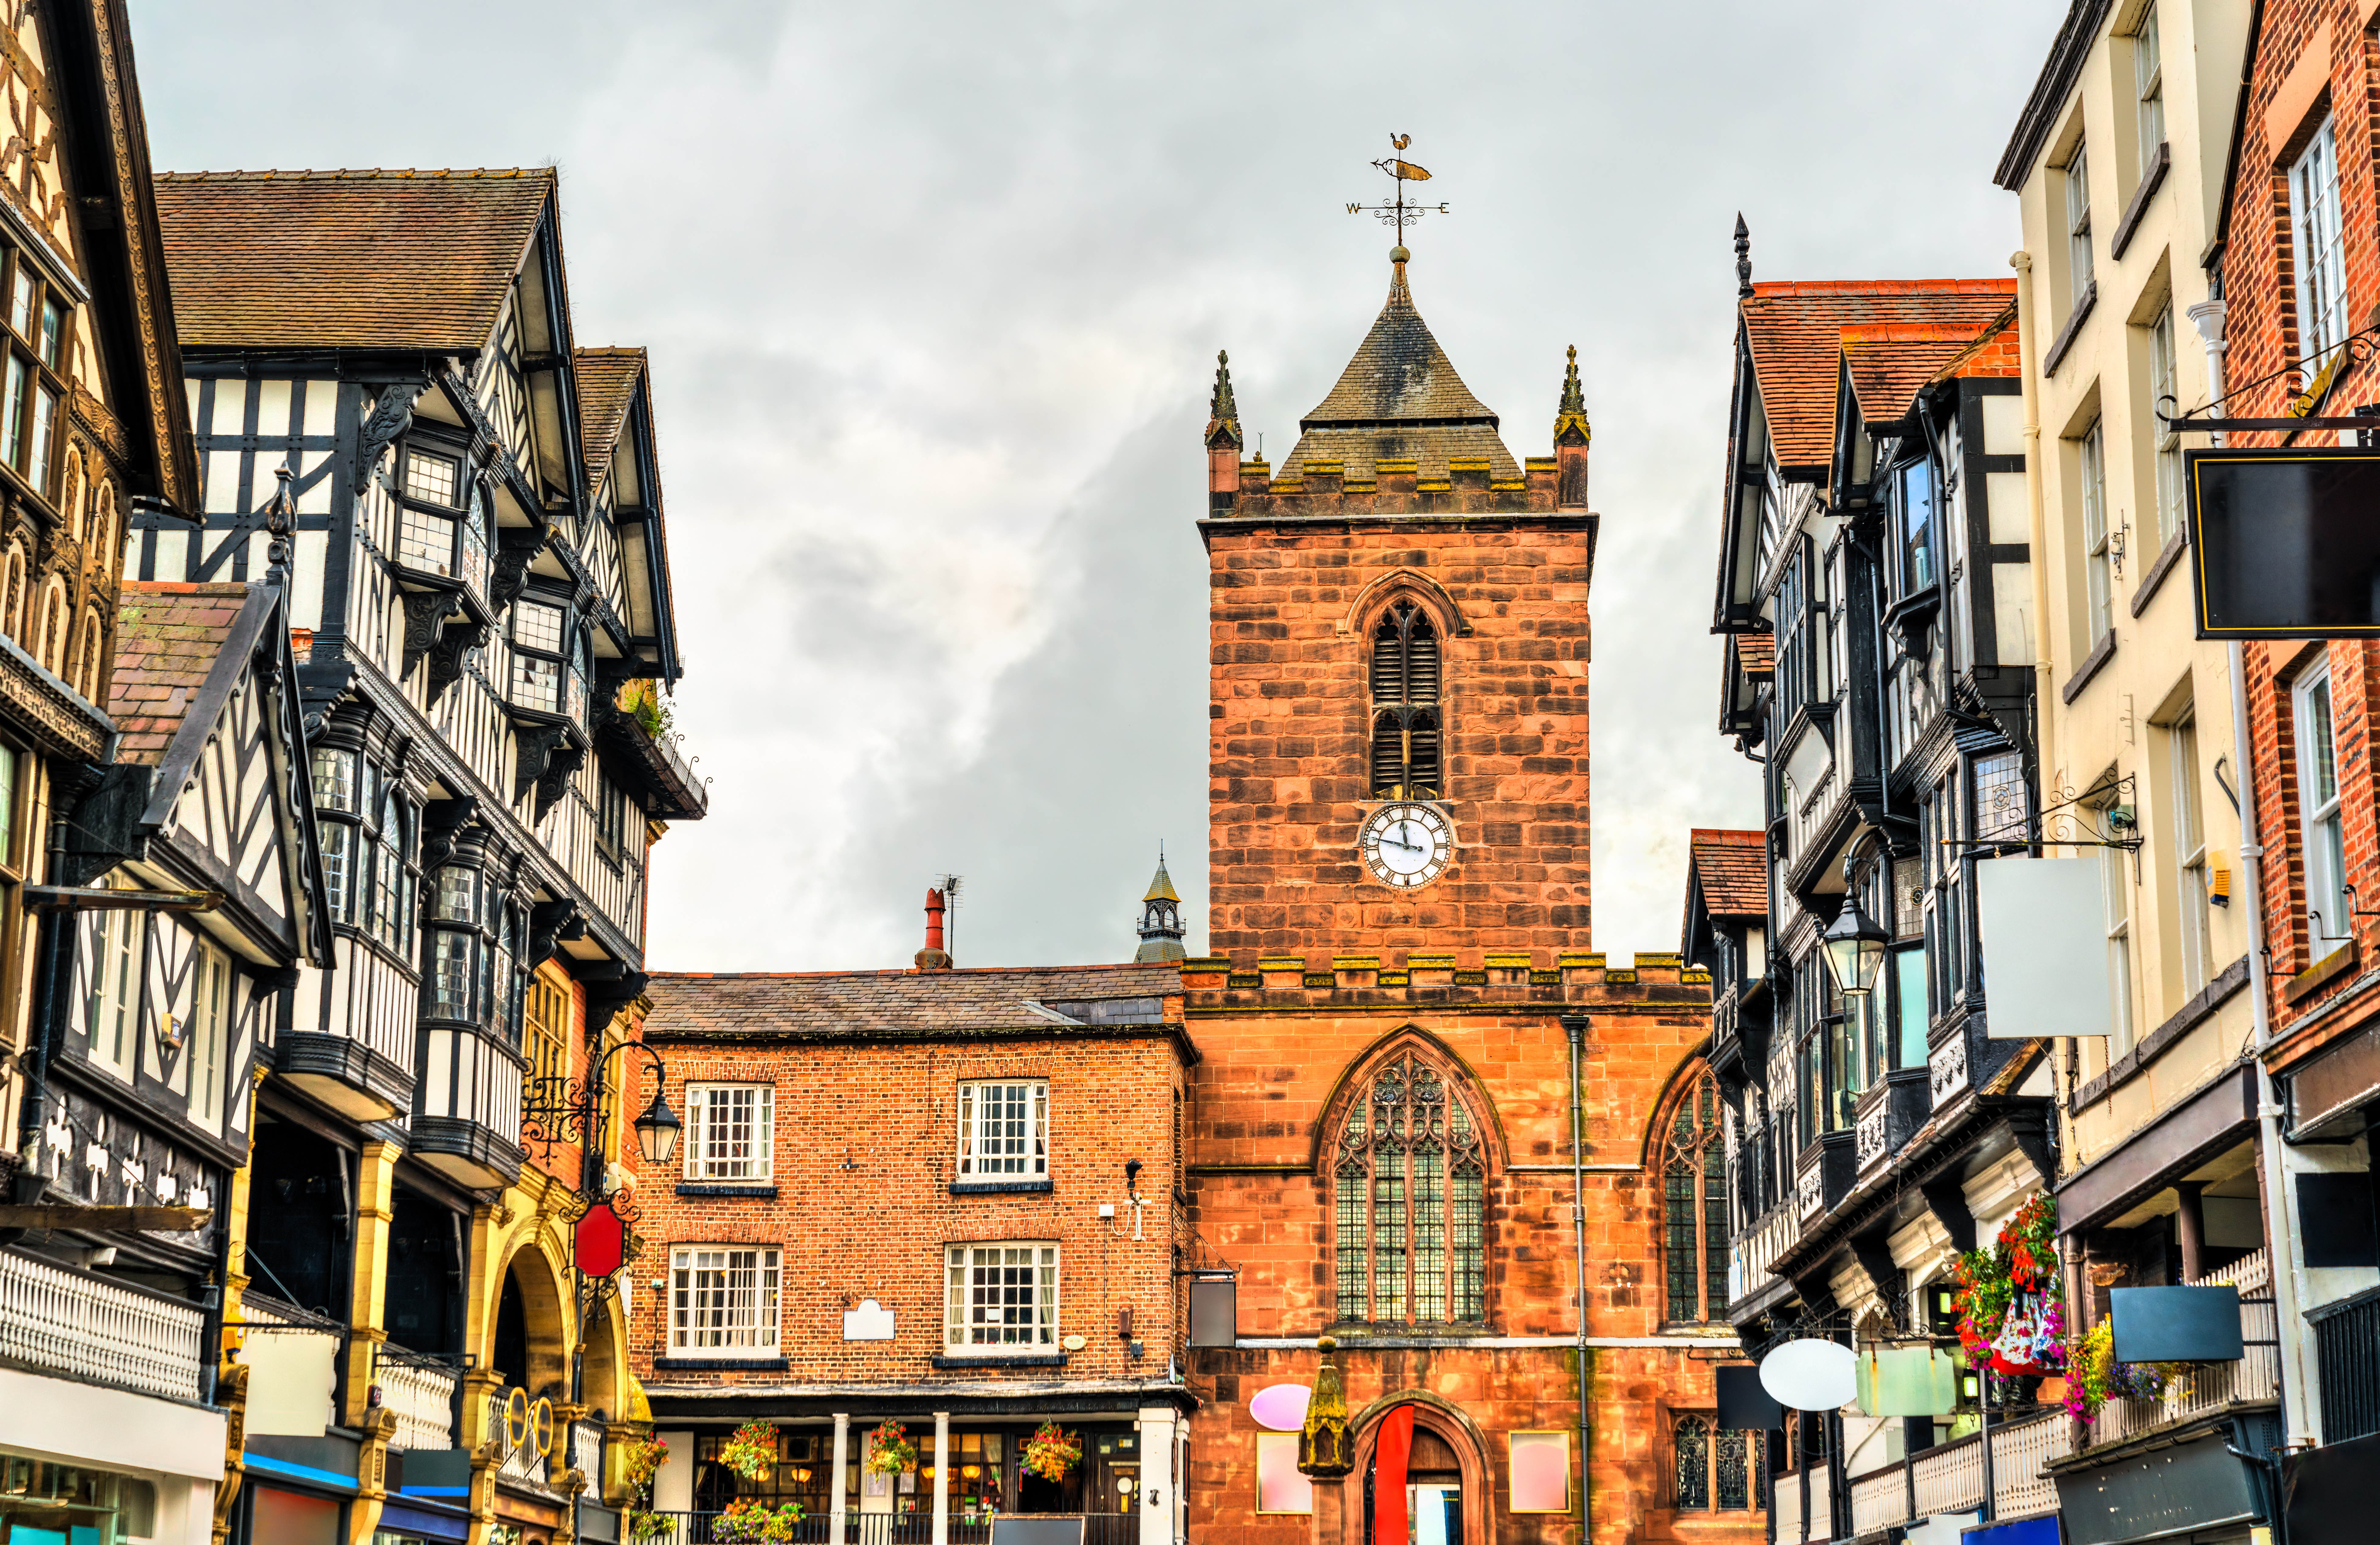 St Peter's Parish Church in Chester - Cheshire, England